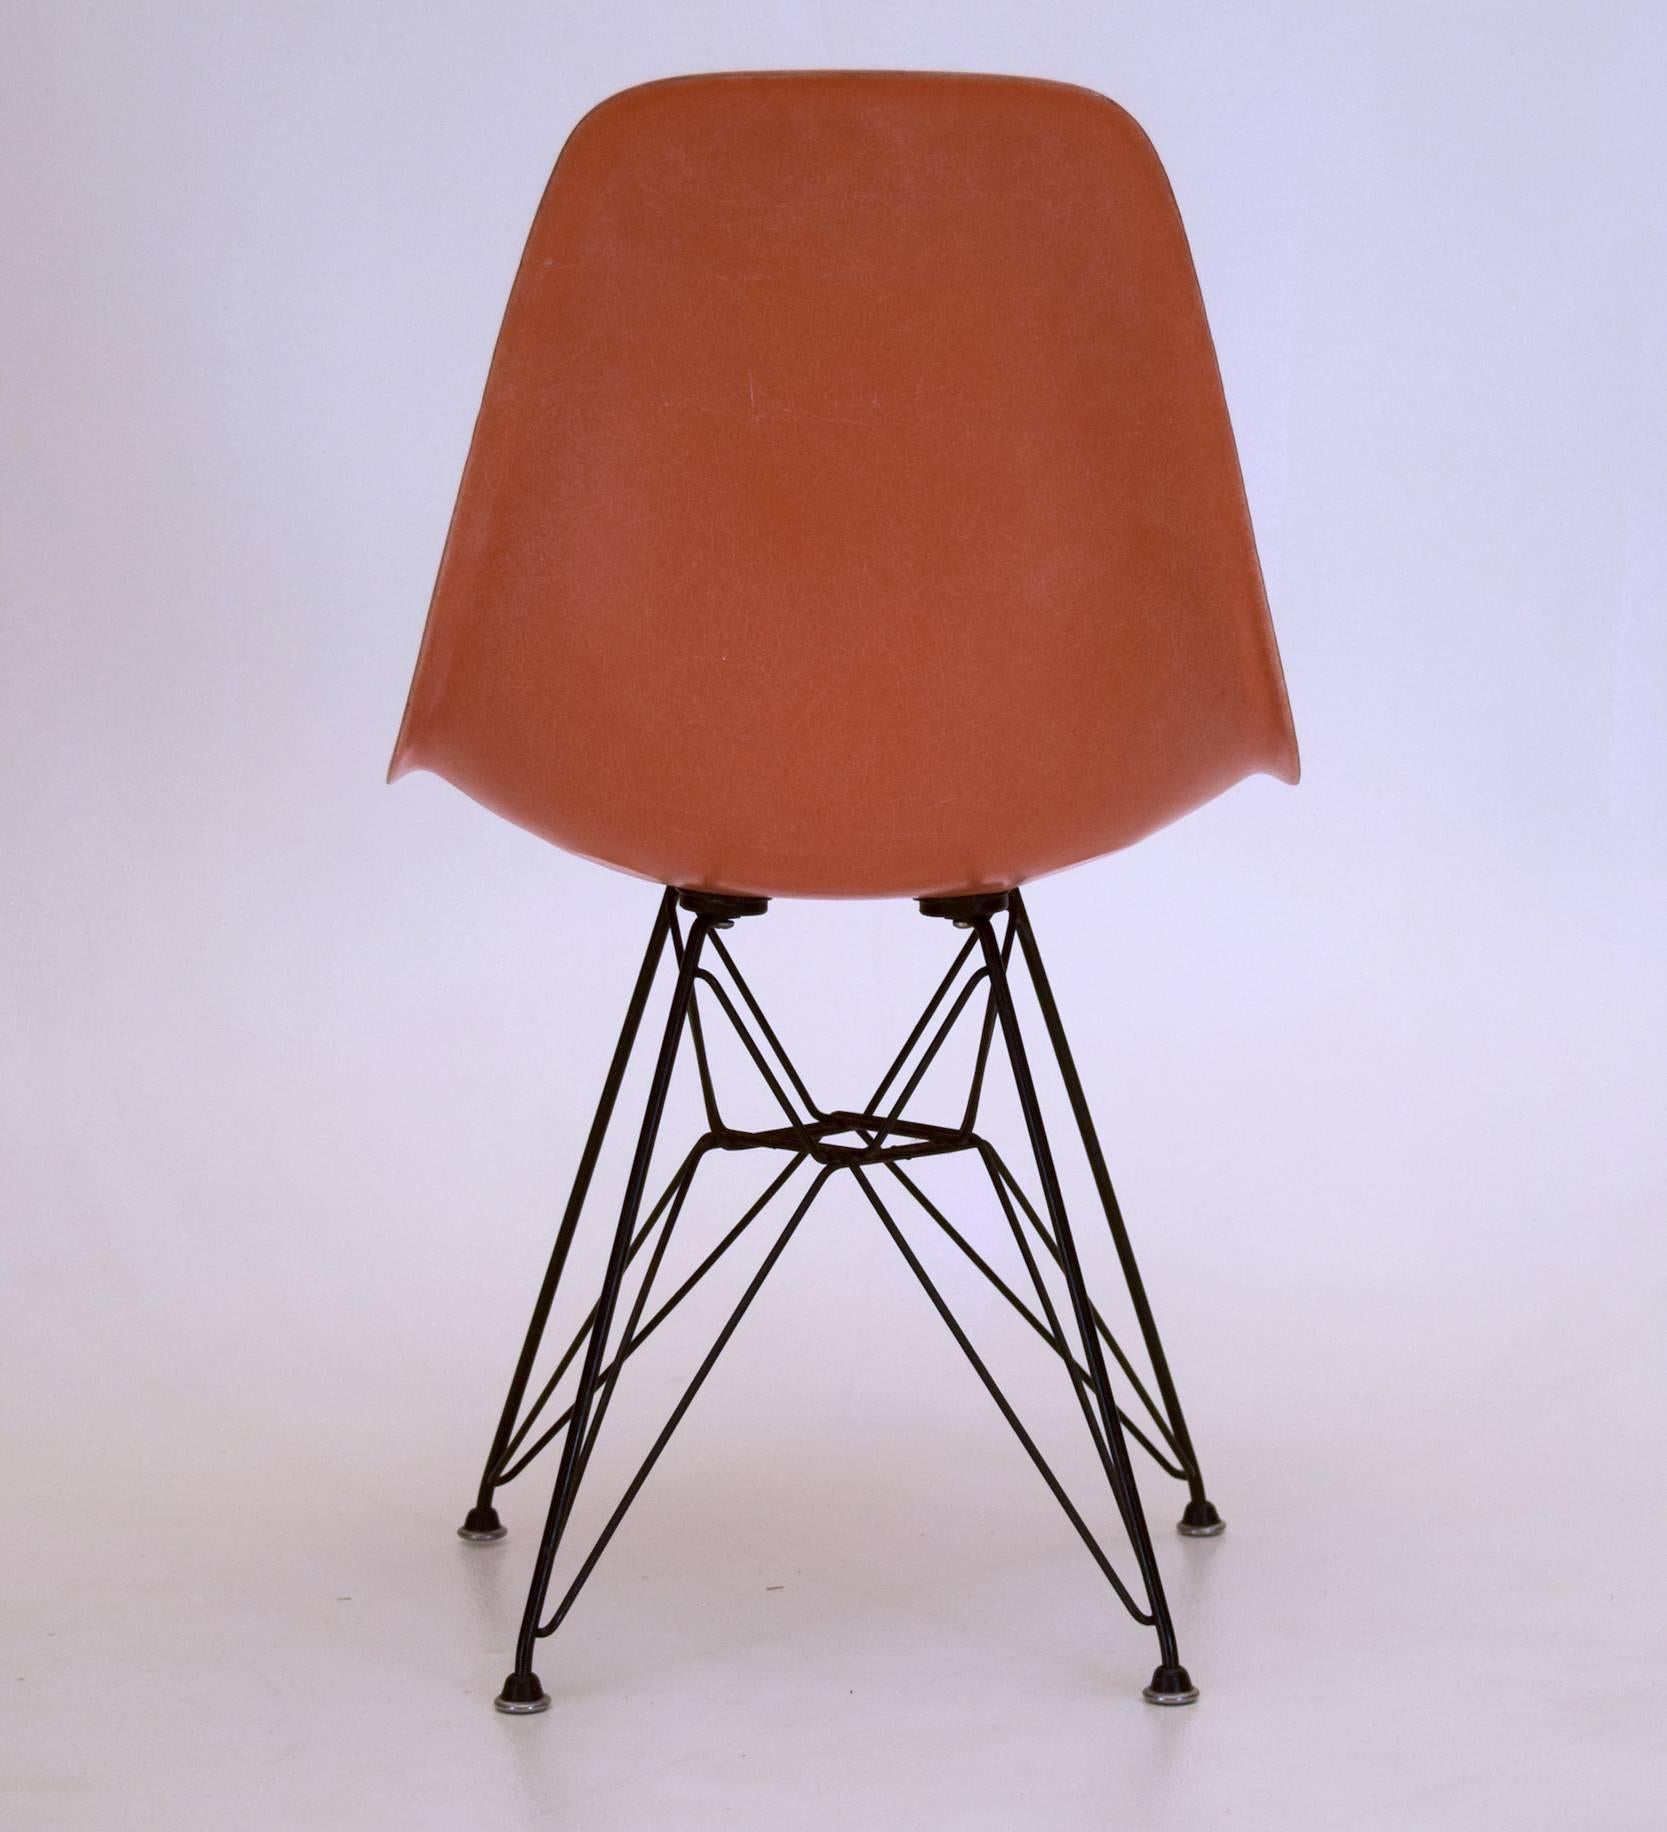 Eames shell side chair
Original base and shell.
22